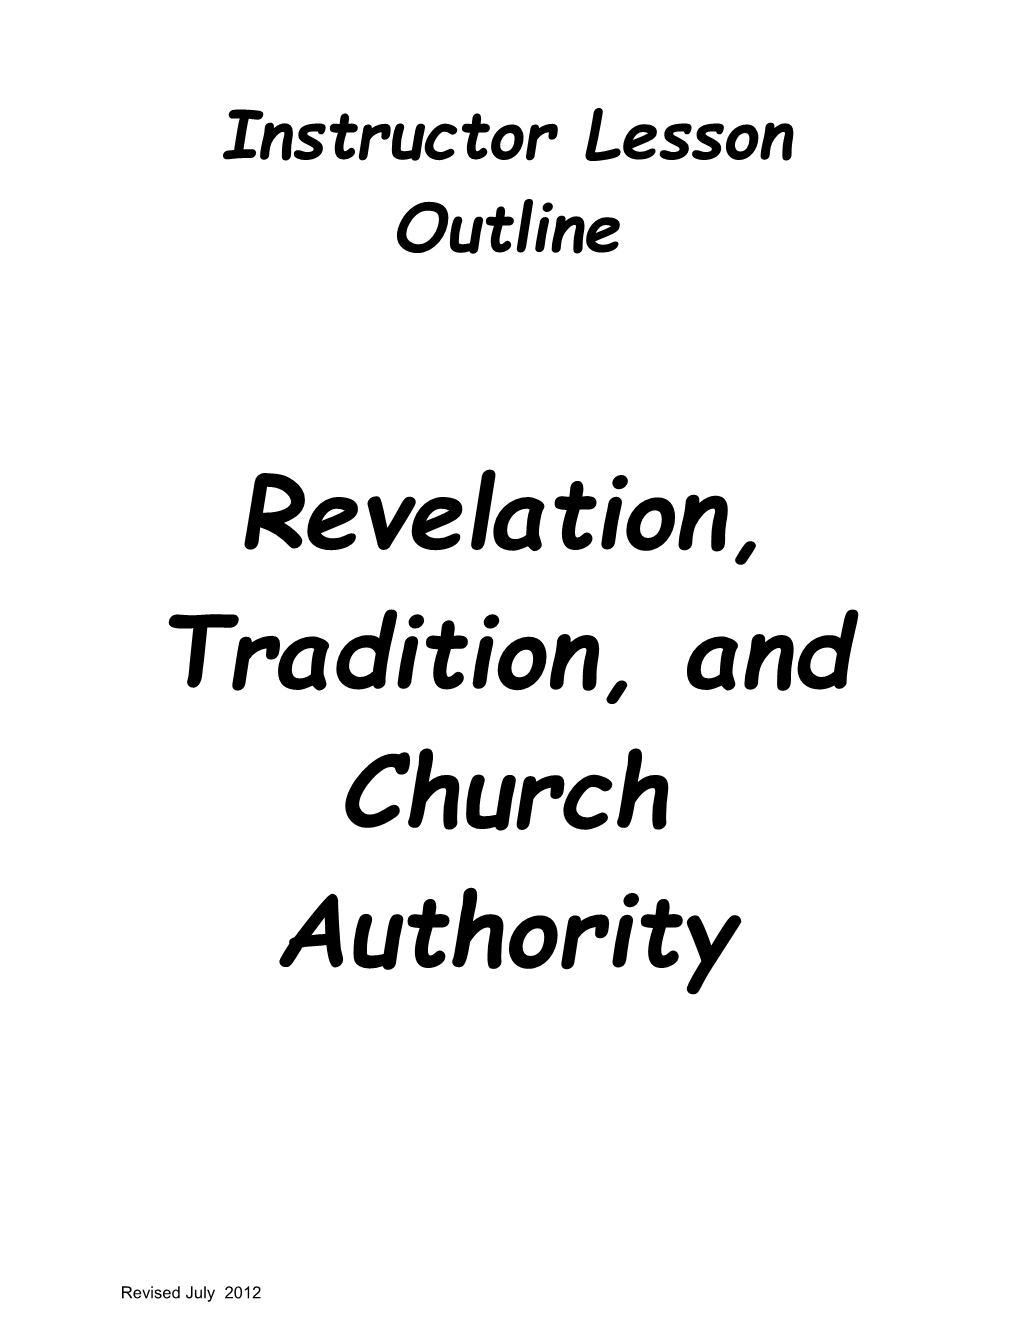 Revelation, Tradition, and Church Authority